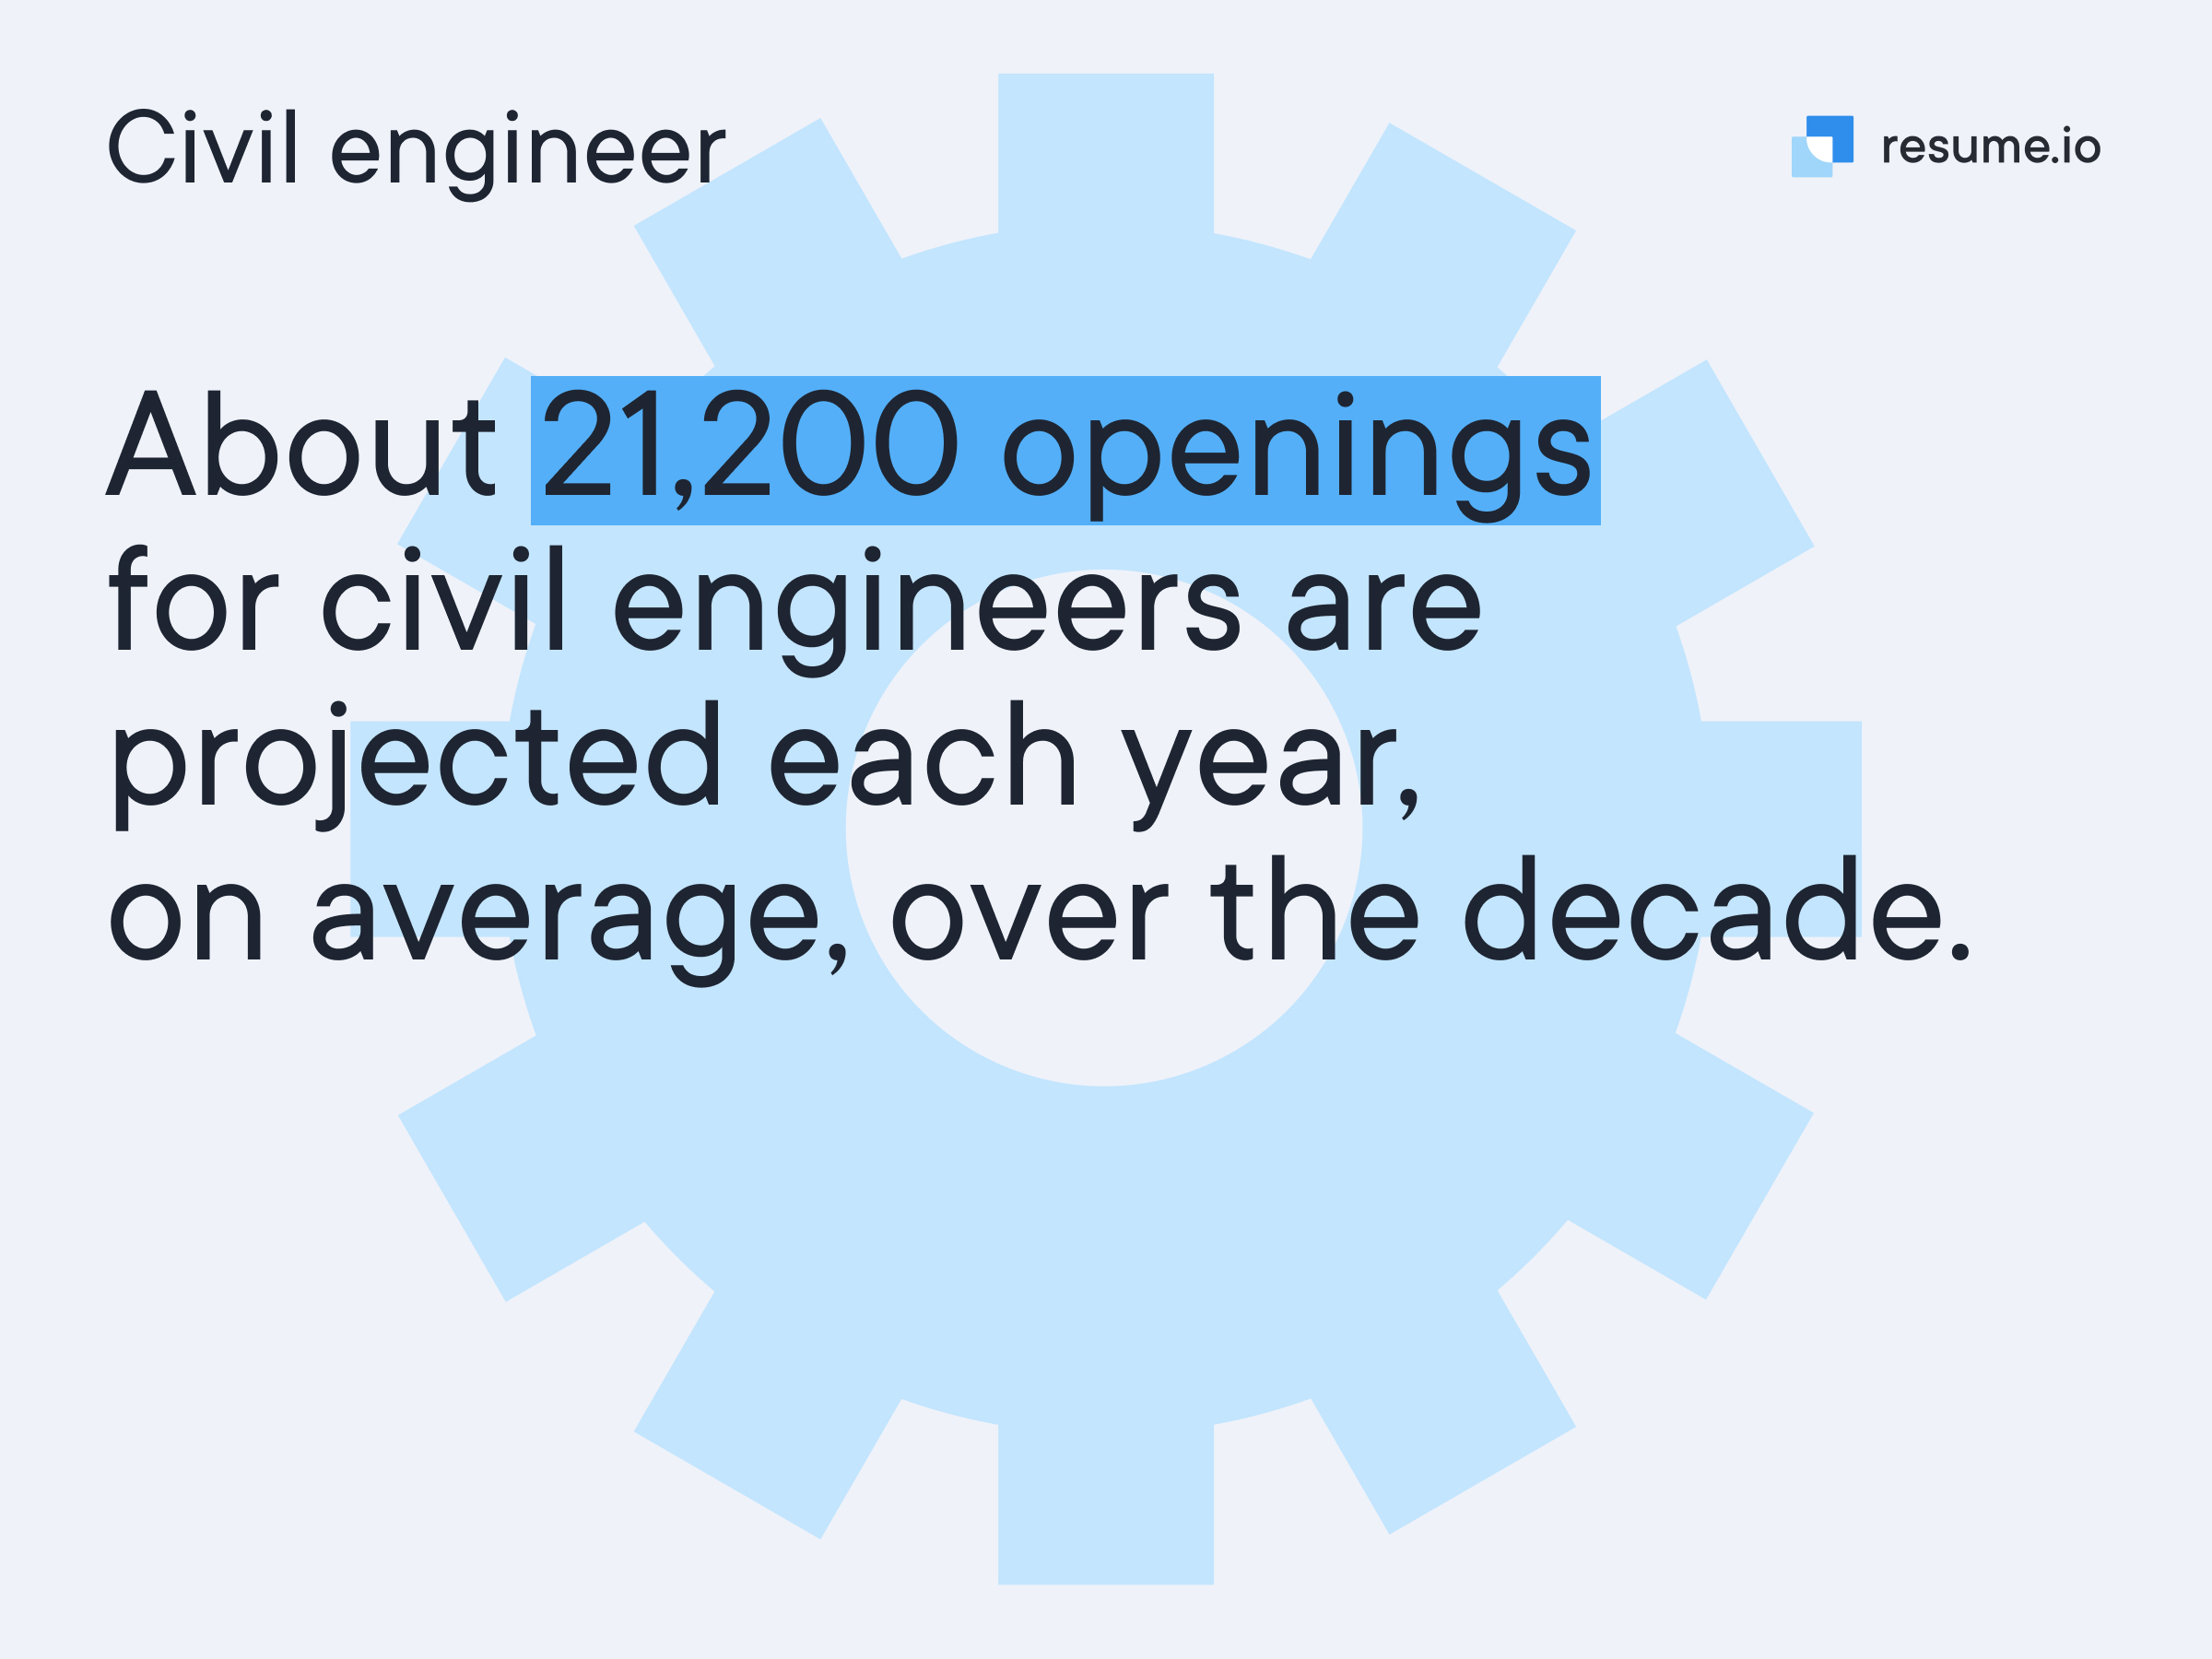 21,200 openings for civil engineers are projected each year